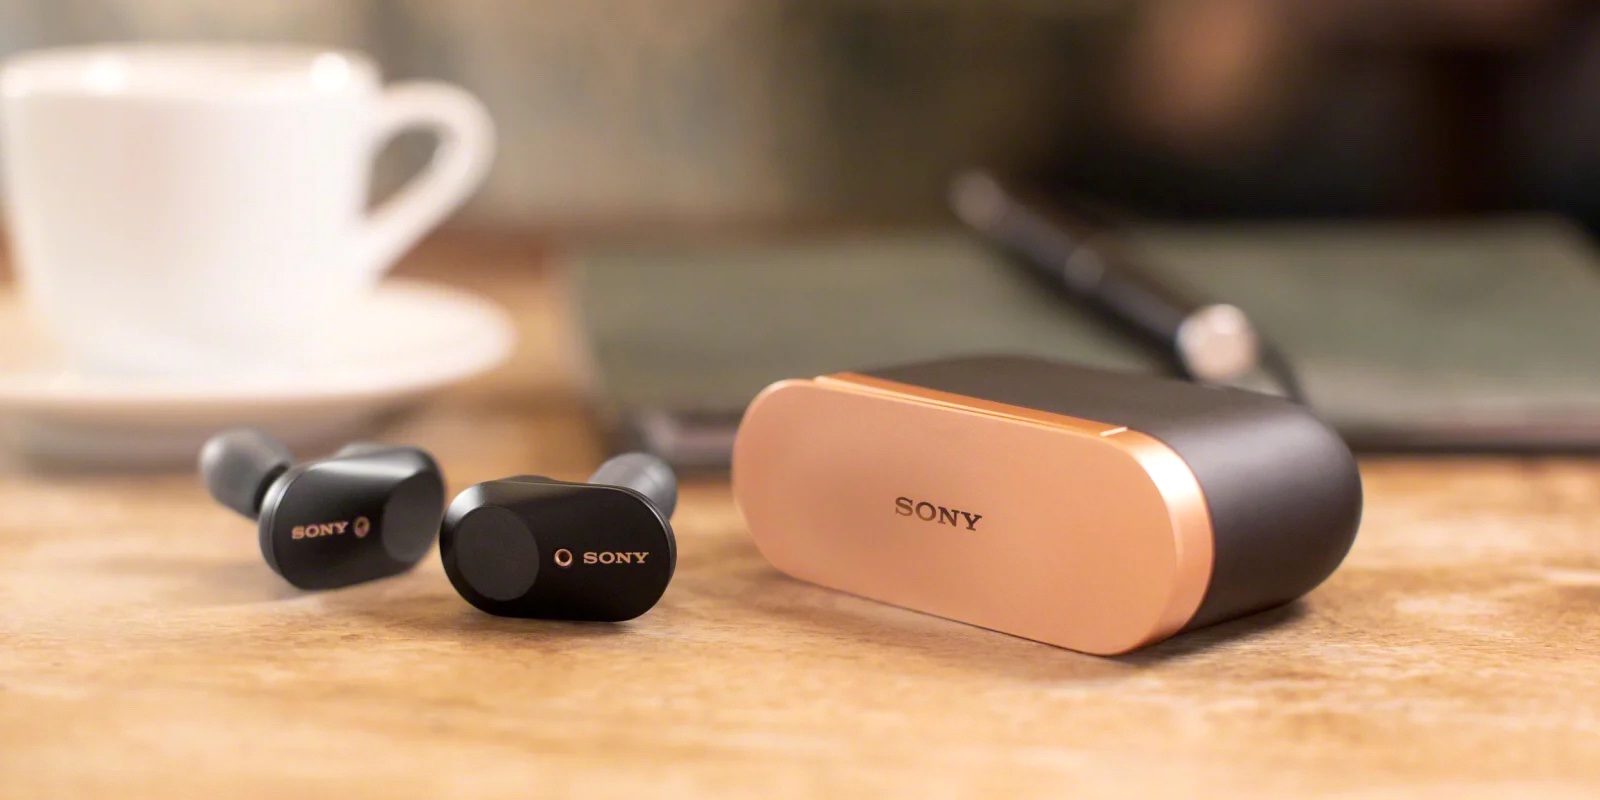 Review: Sony WF-1000XM3 Is Best Noise Cancellation Wireless Earbuds